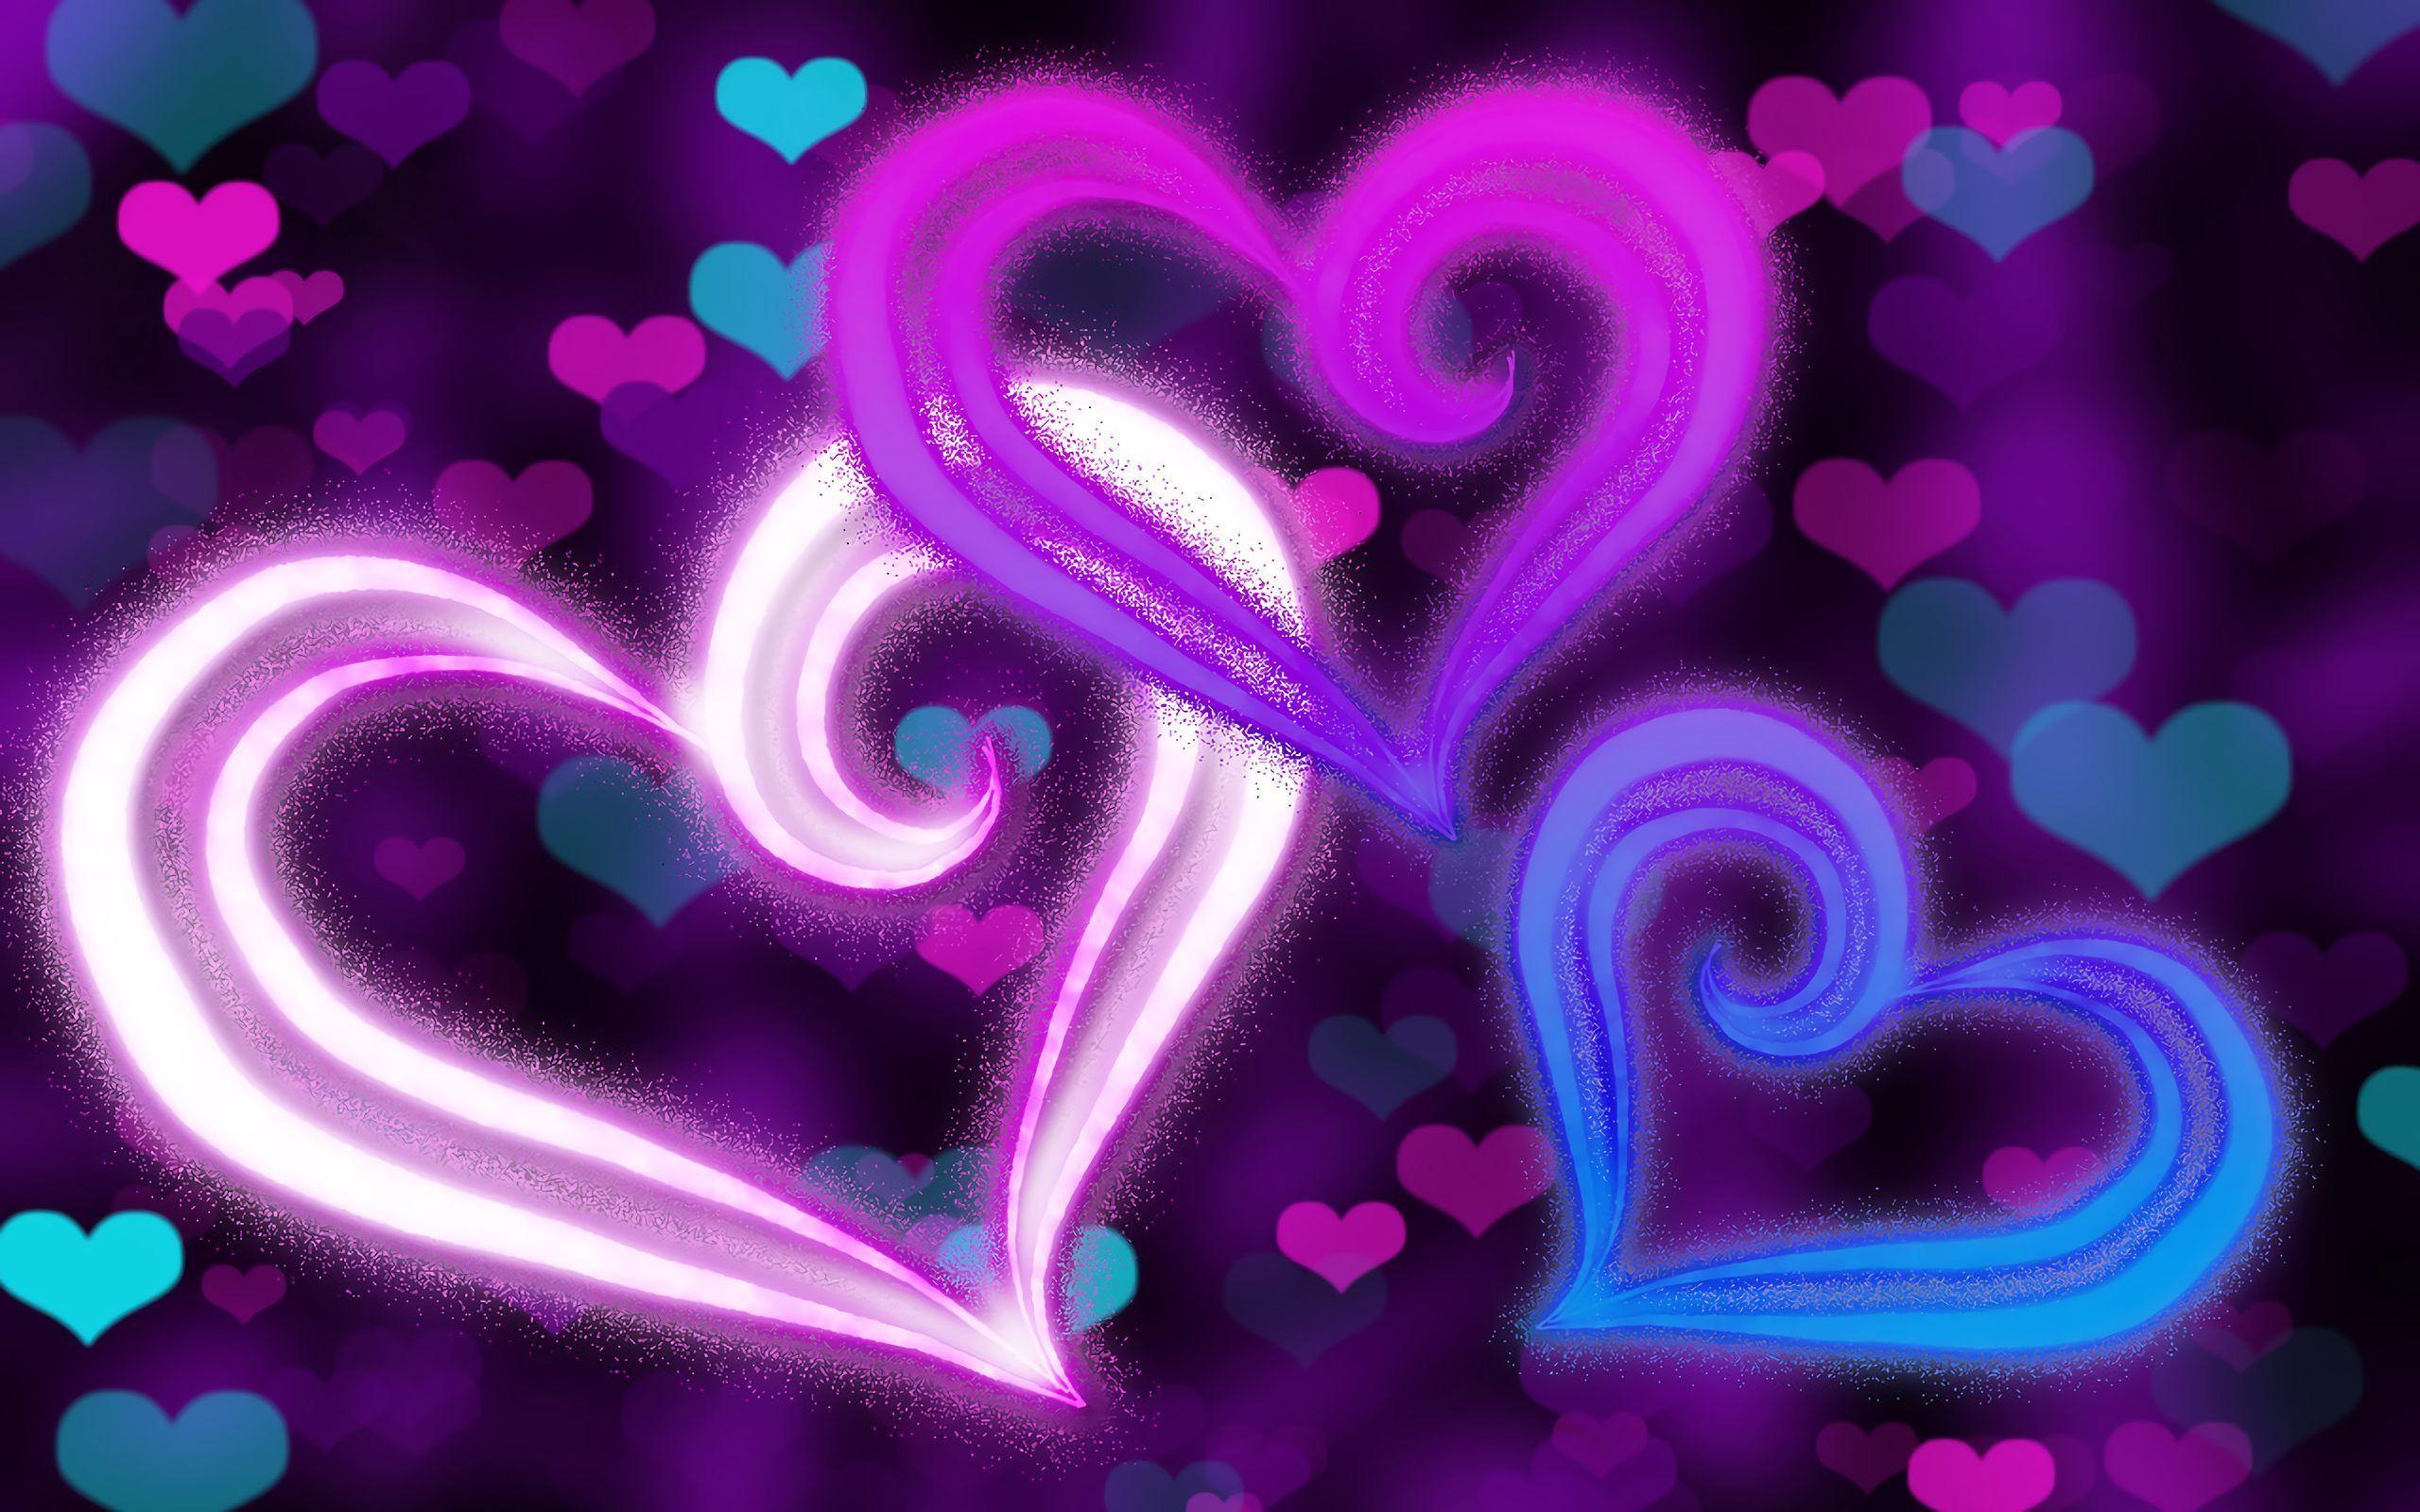 Colorful Hearts Wallpaper High Quality Resolution EO. Awesomeness